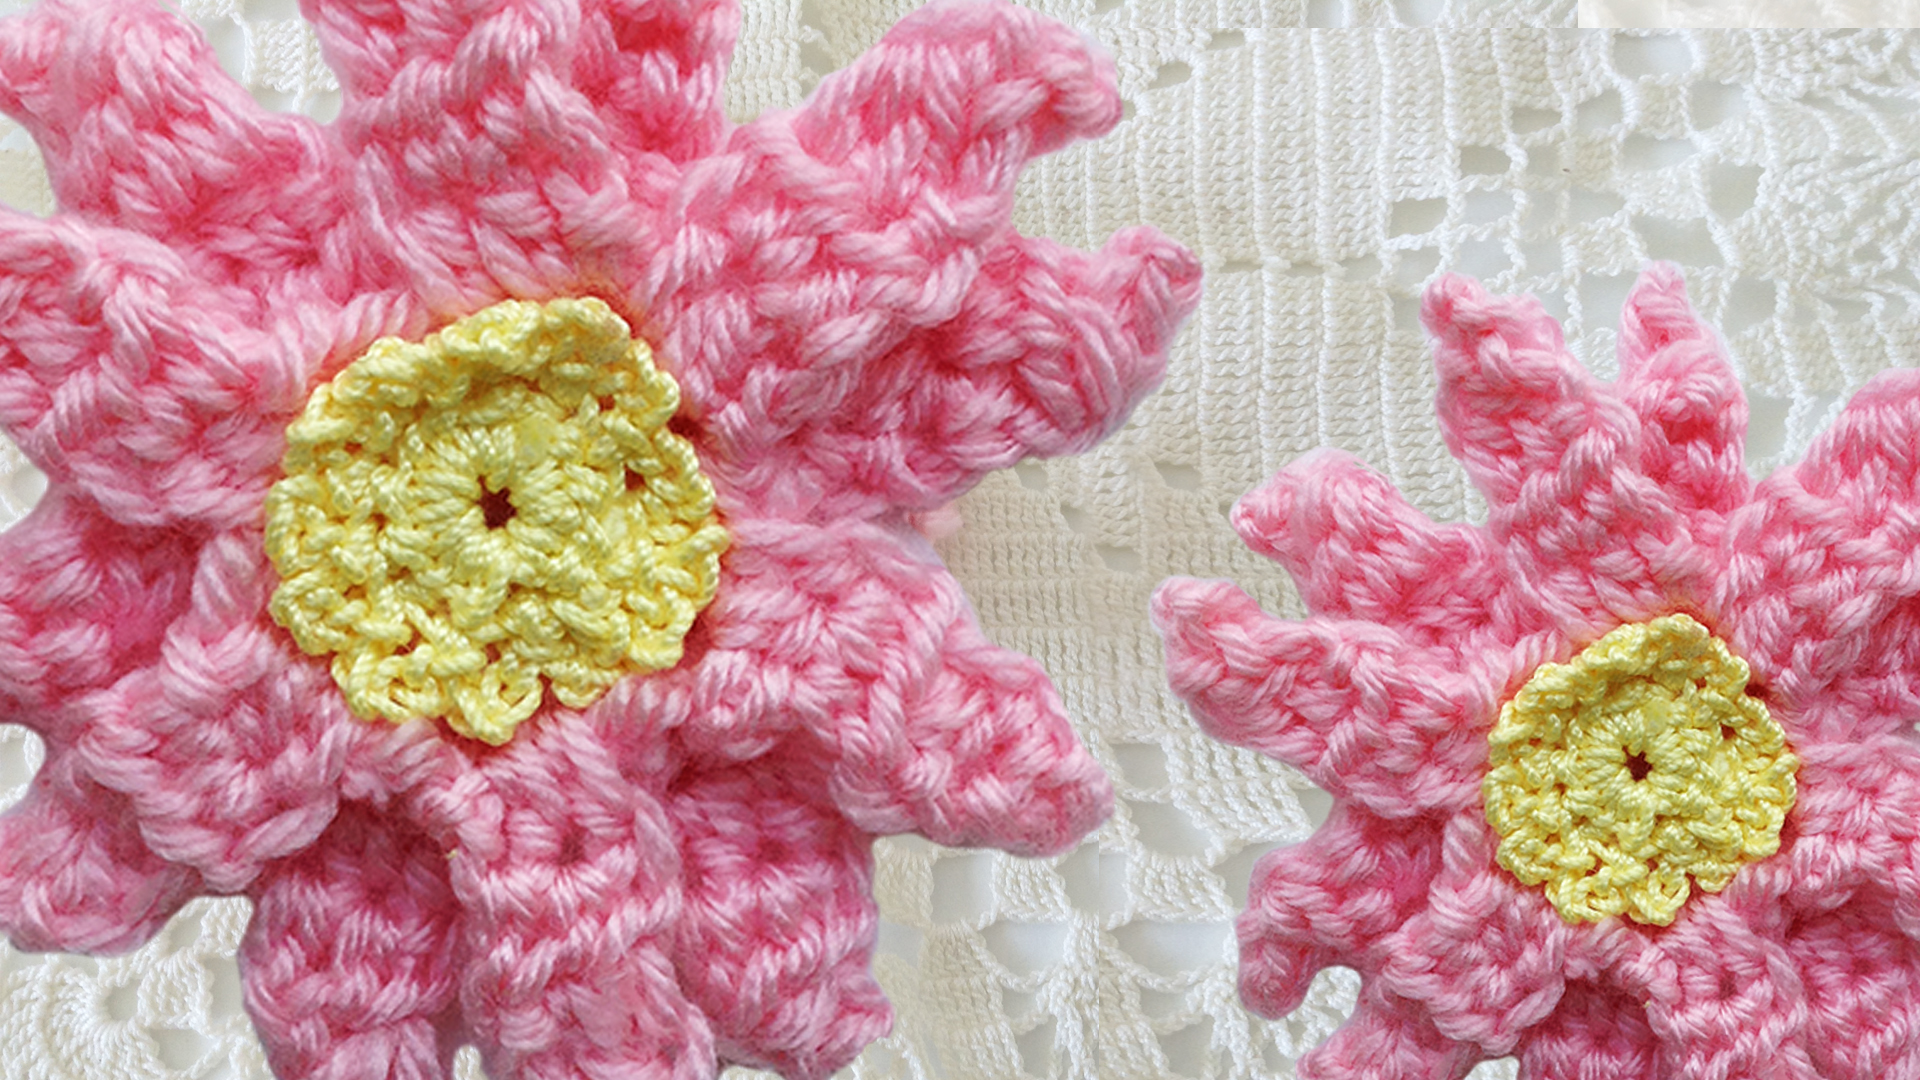 maggies-crochet-cosmos-flower-free-pattern-close-up